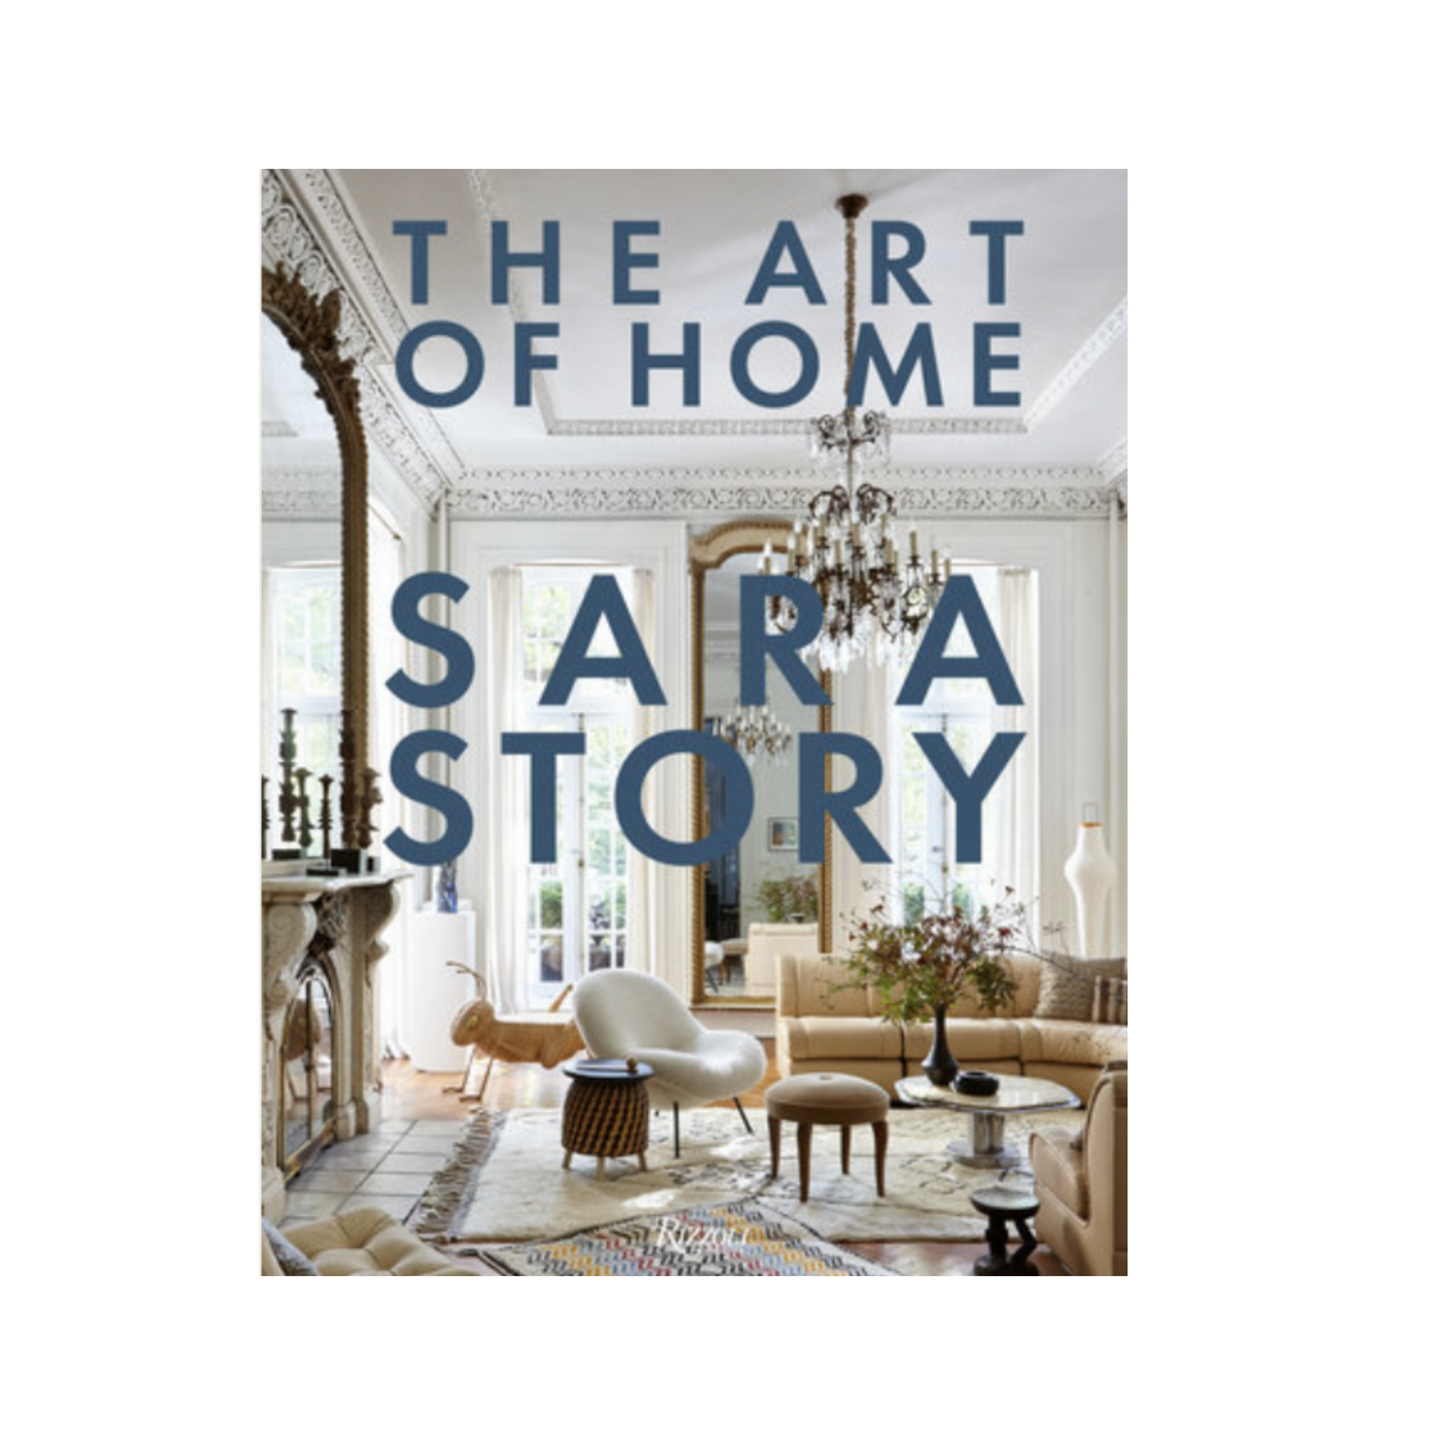 The Art of Home by Sara Story, with Judith Nasatir